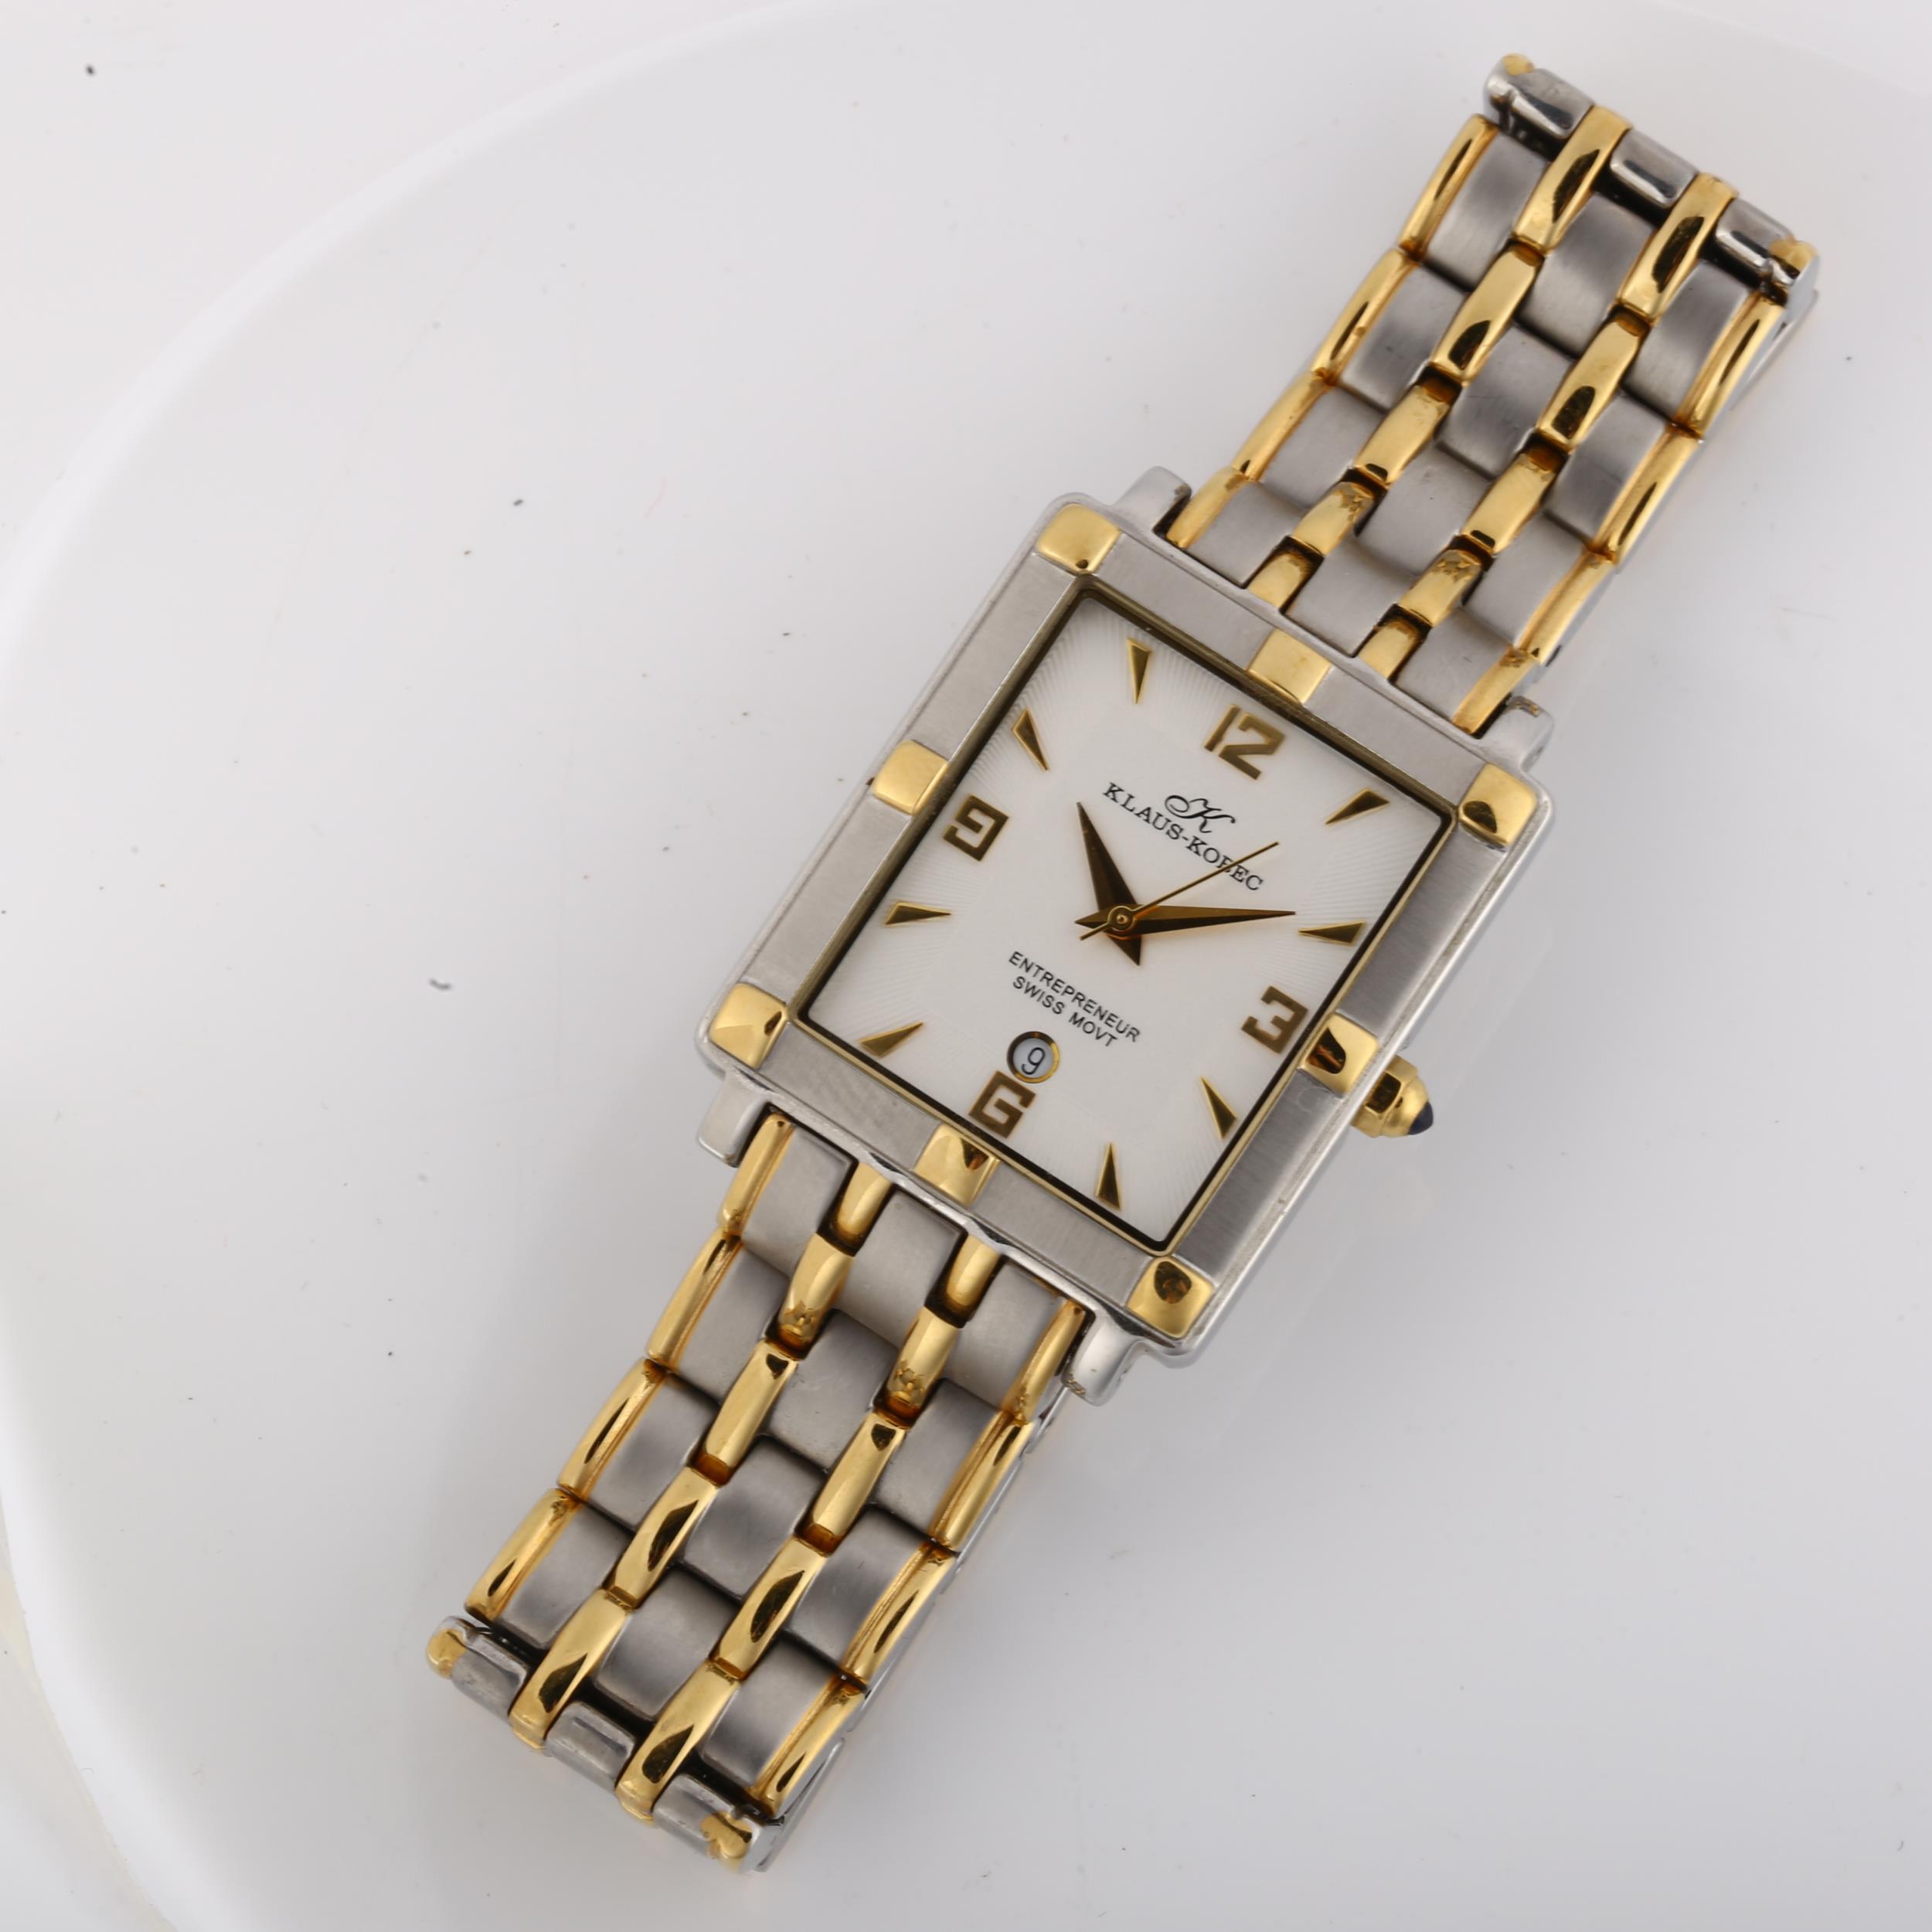 KLAUS-KOBEC - a gold plated stainless steel Entrepreneur quartz bracelet watch, silvered dial with - Image 2 of 5